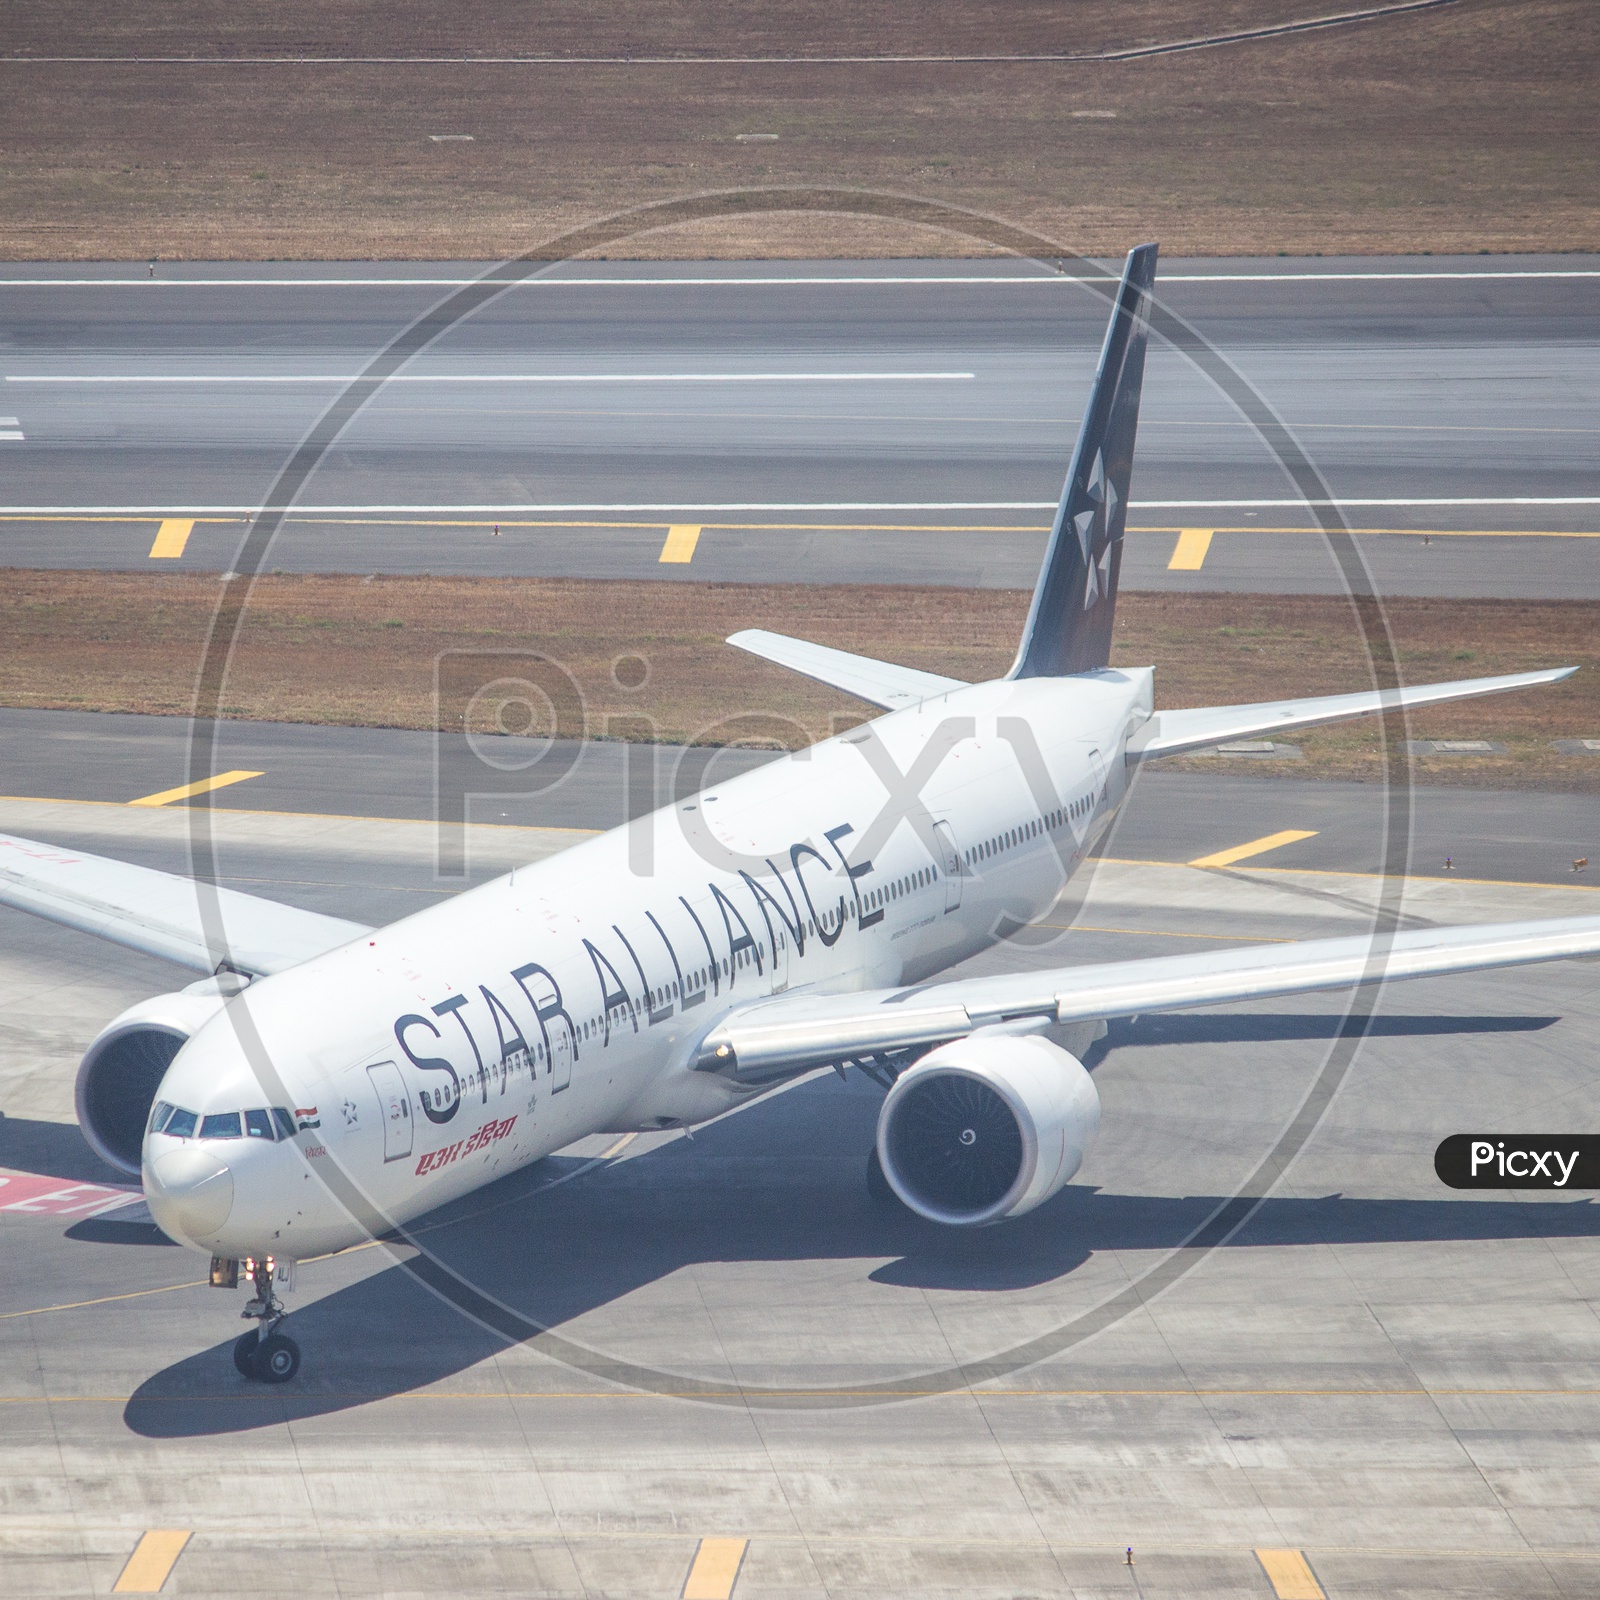 B777 in special star alliance livery.